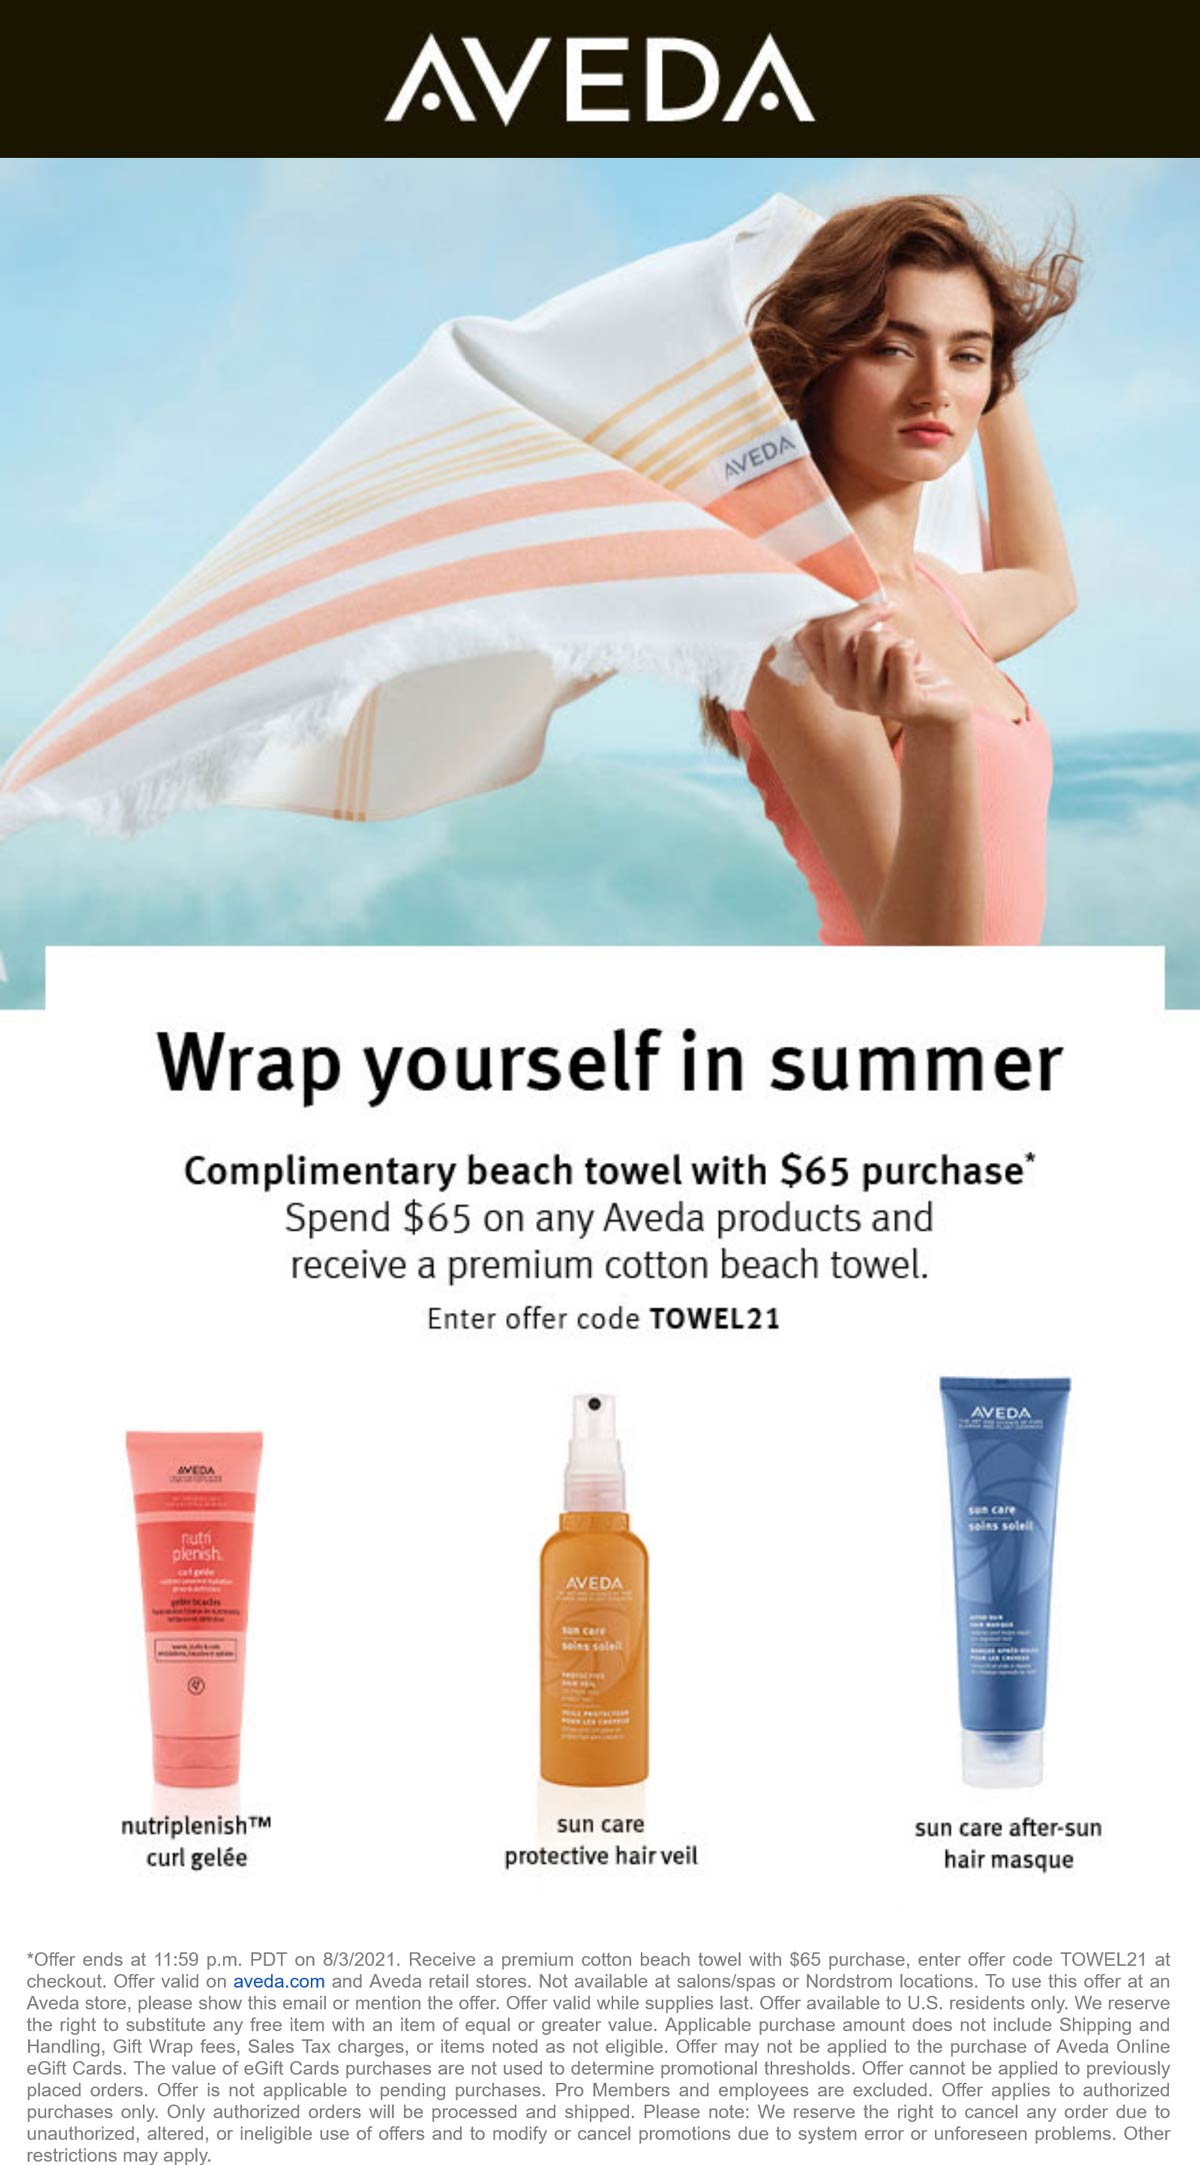 AVEDA stores Coupon  Free beach towel with $65 spent today at AVEDA via promo code TOWEL21 #aveda 